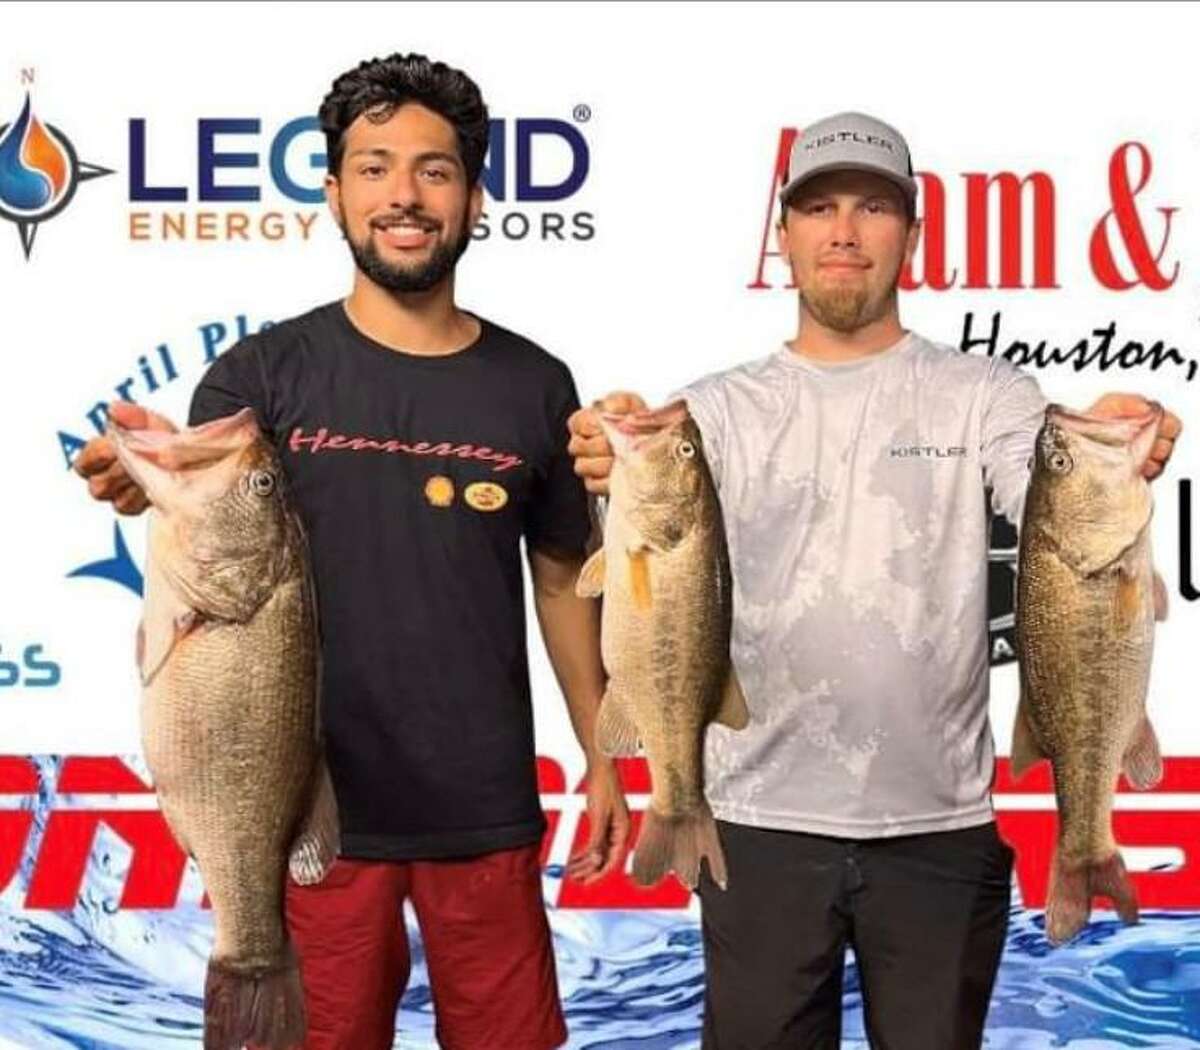 Kyle Deruyter and Sam Ghattas came in third place in the CONROEBASS Tuesday Tournament with a stringer weight of 11.77 pounds.